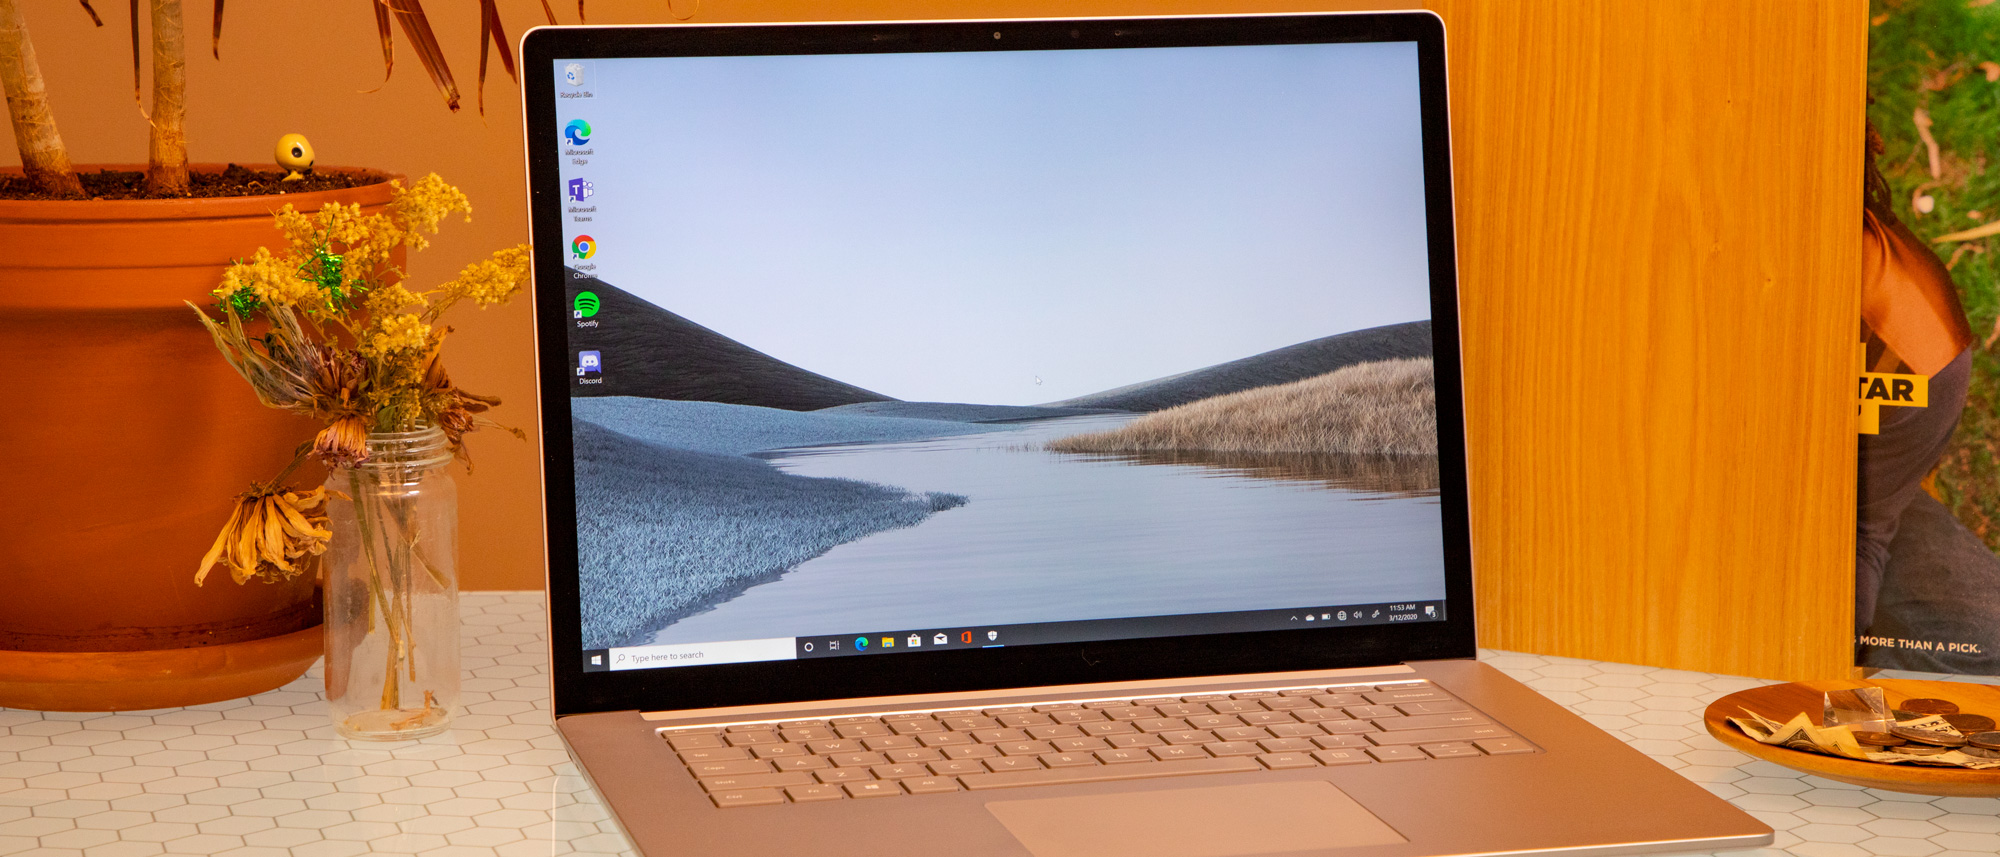 Microsoft Surface Laptop 3 (15-inch, Intel) review | Tom's Guide